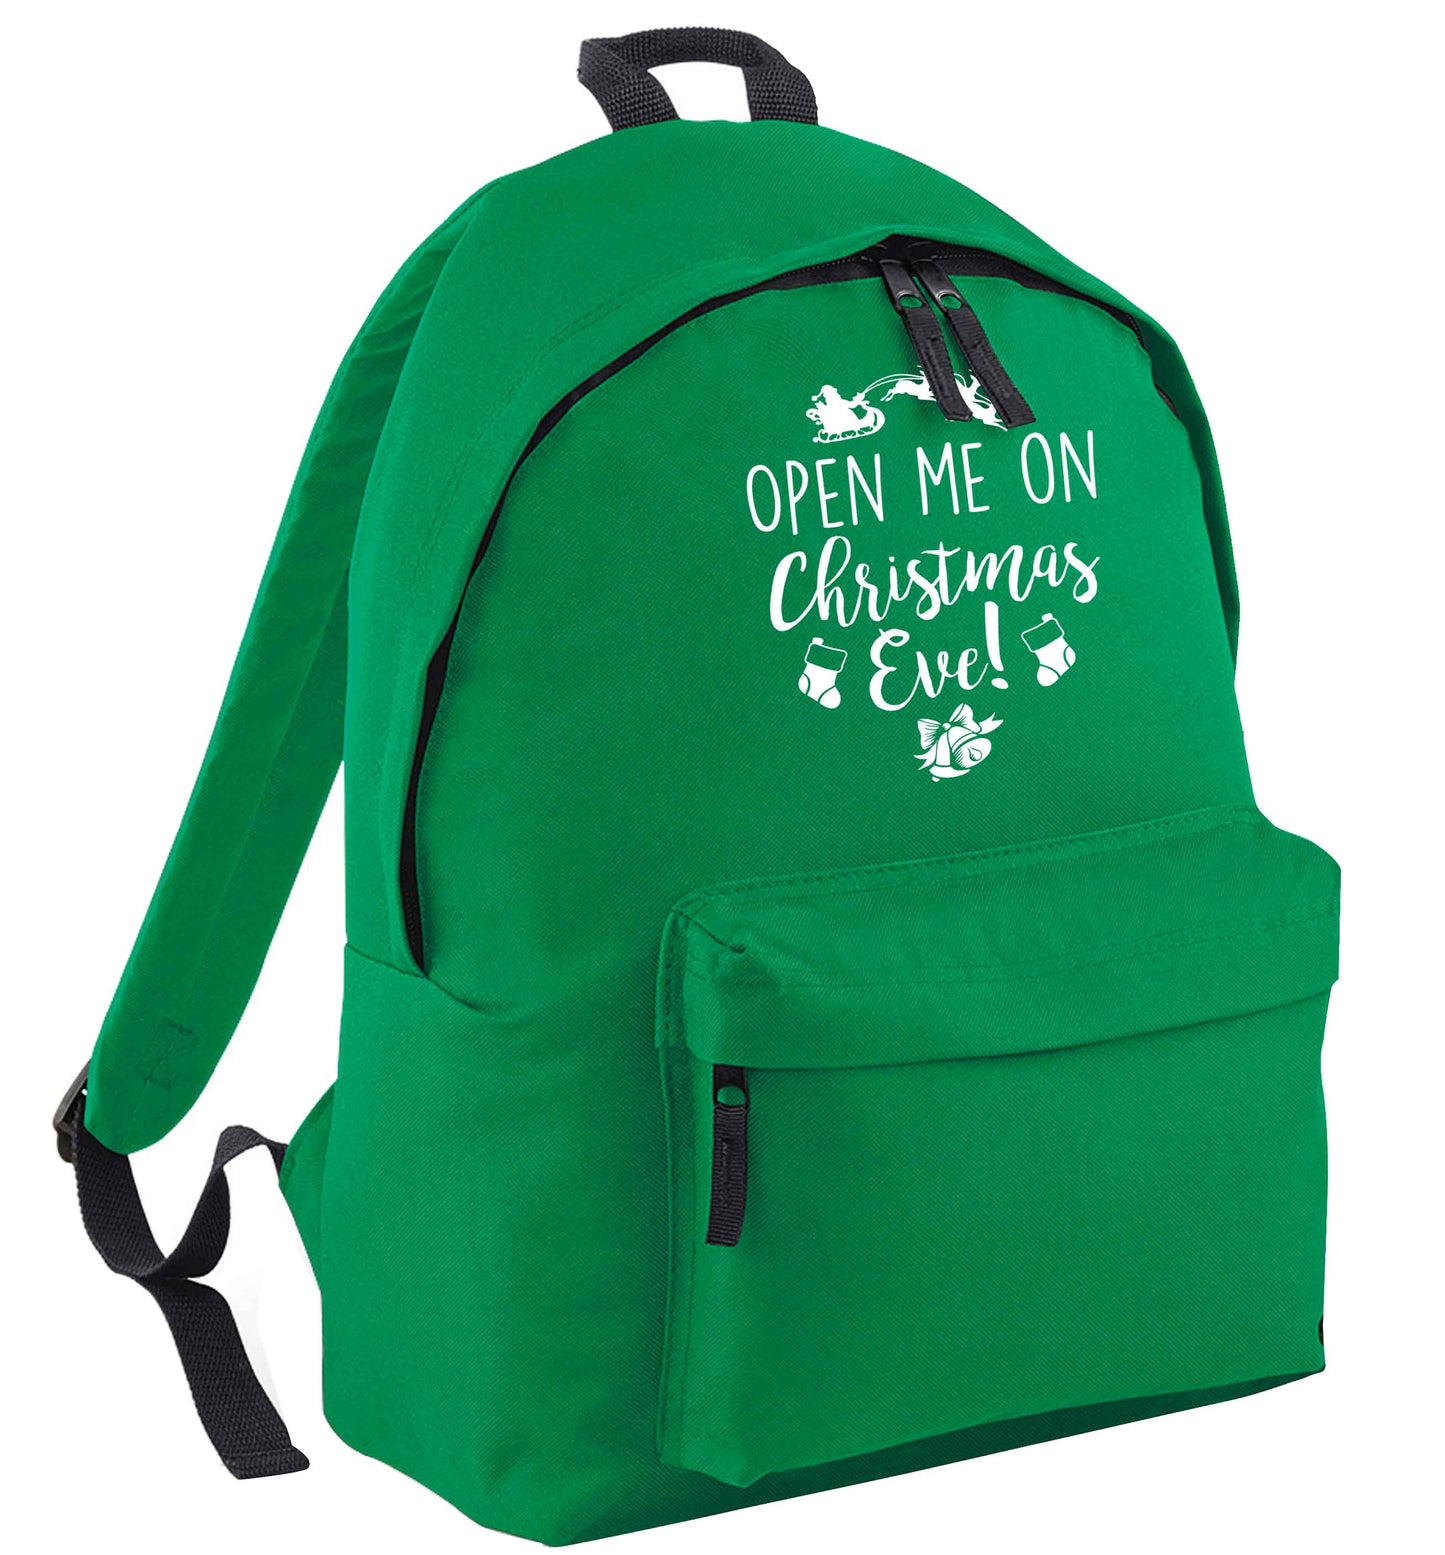 Open me on Christmas Day green adults backpack